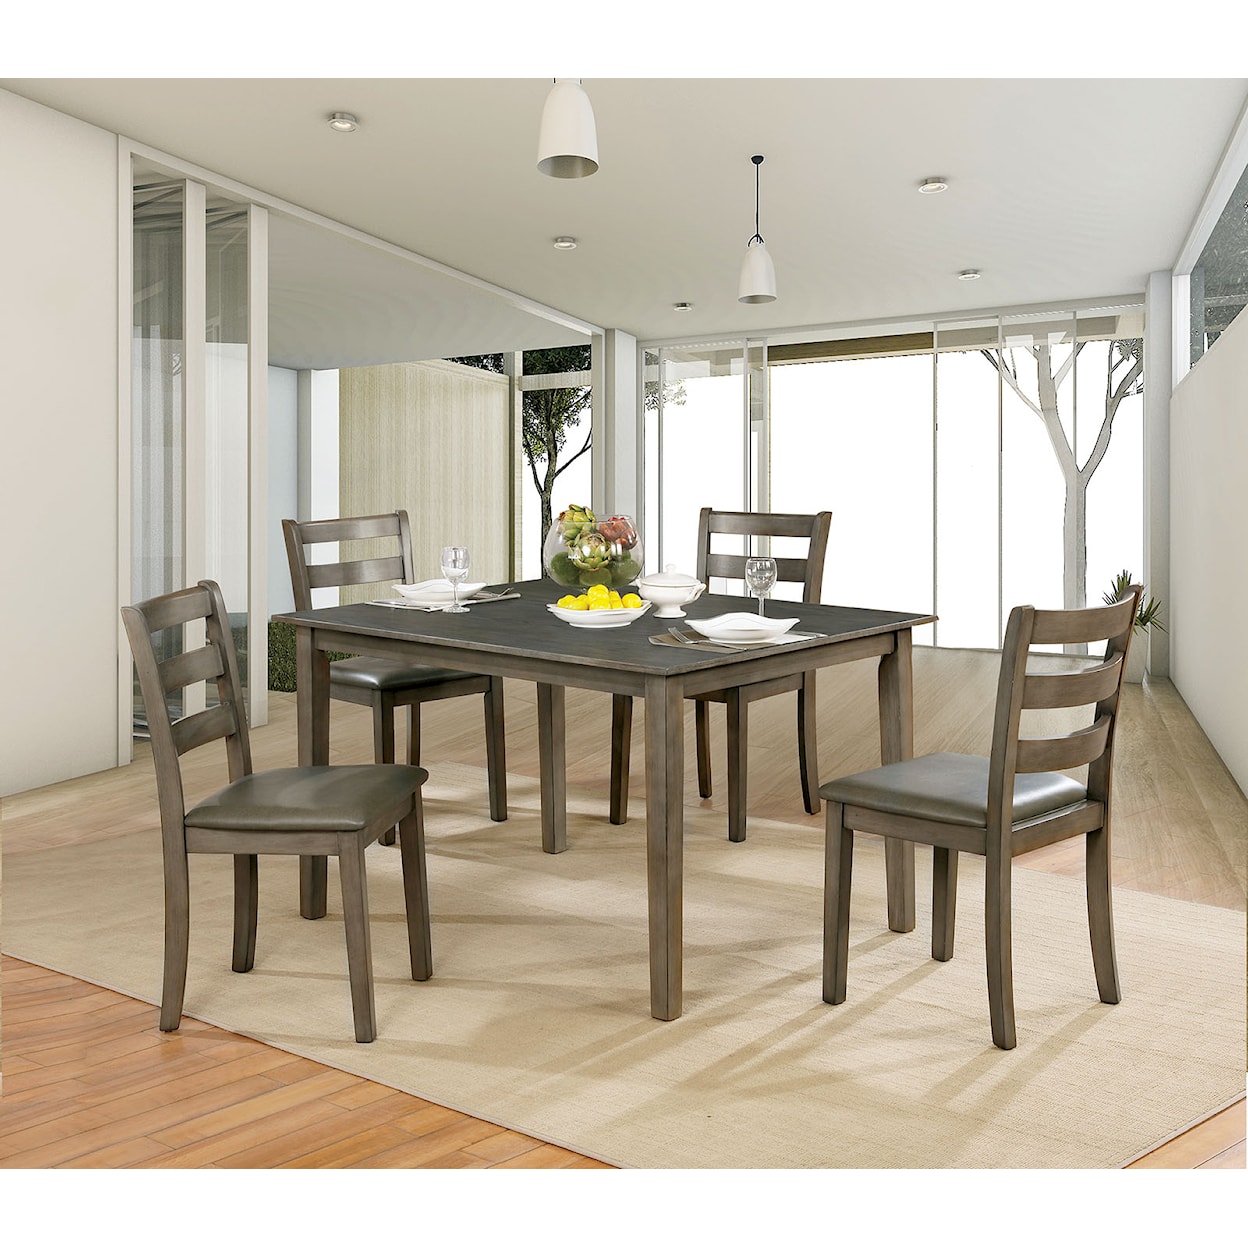 Furniture of America Marcelle MARCELLO GREY 5 PIECE DINING SET |